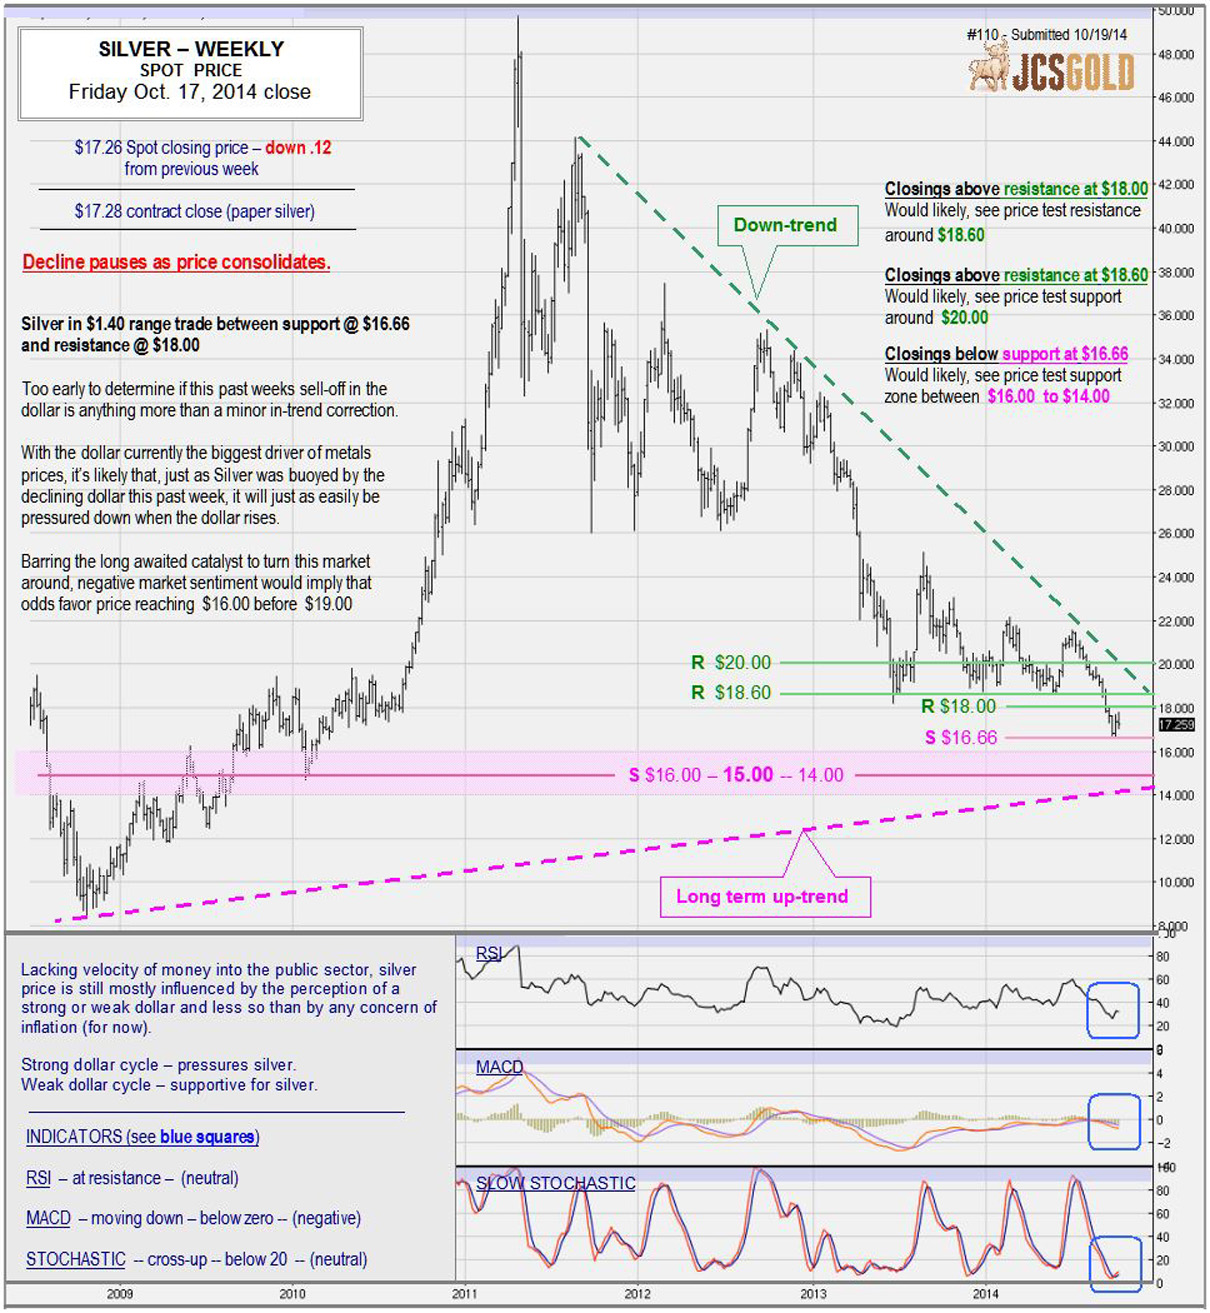 Oct. 17, 2014 chart & commentary